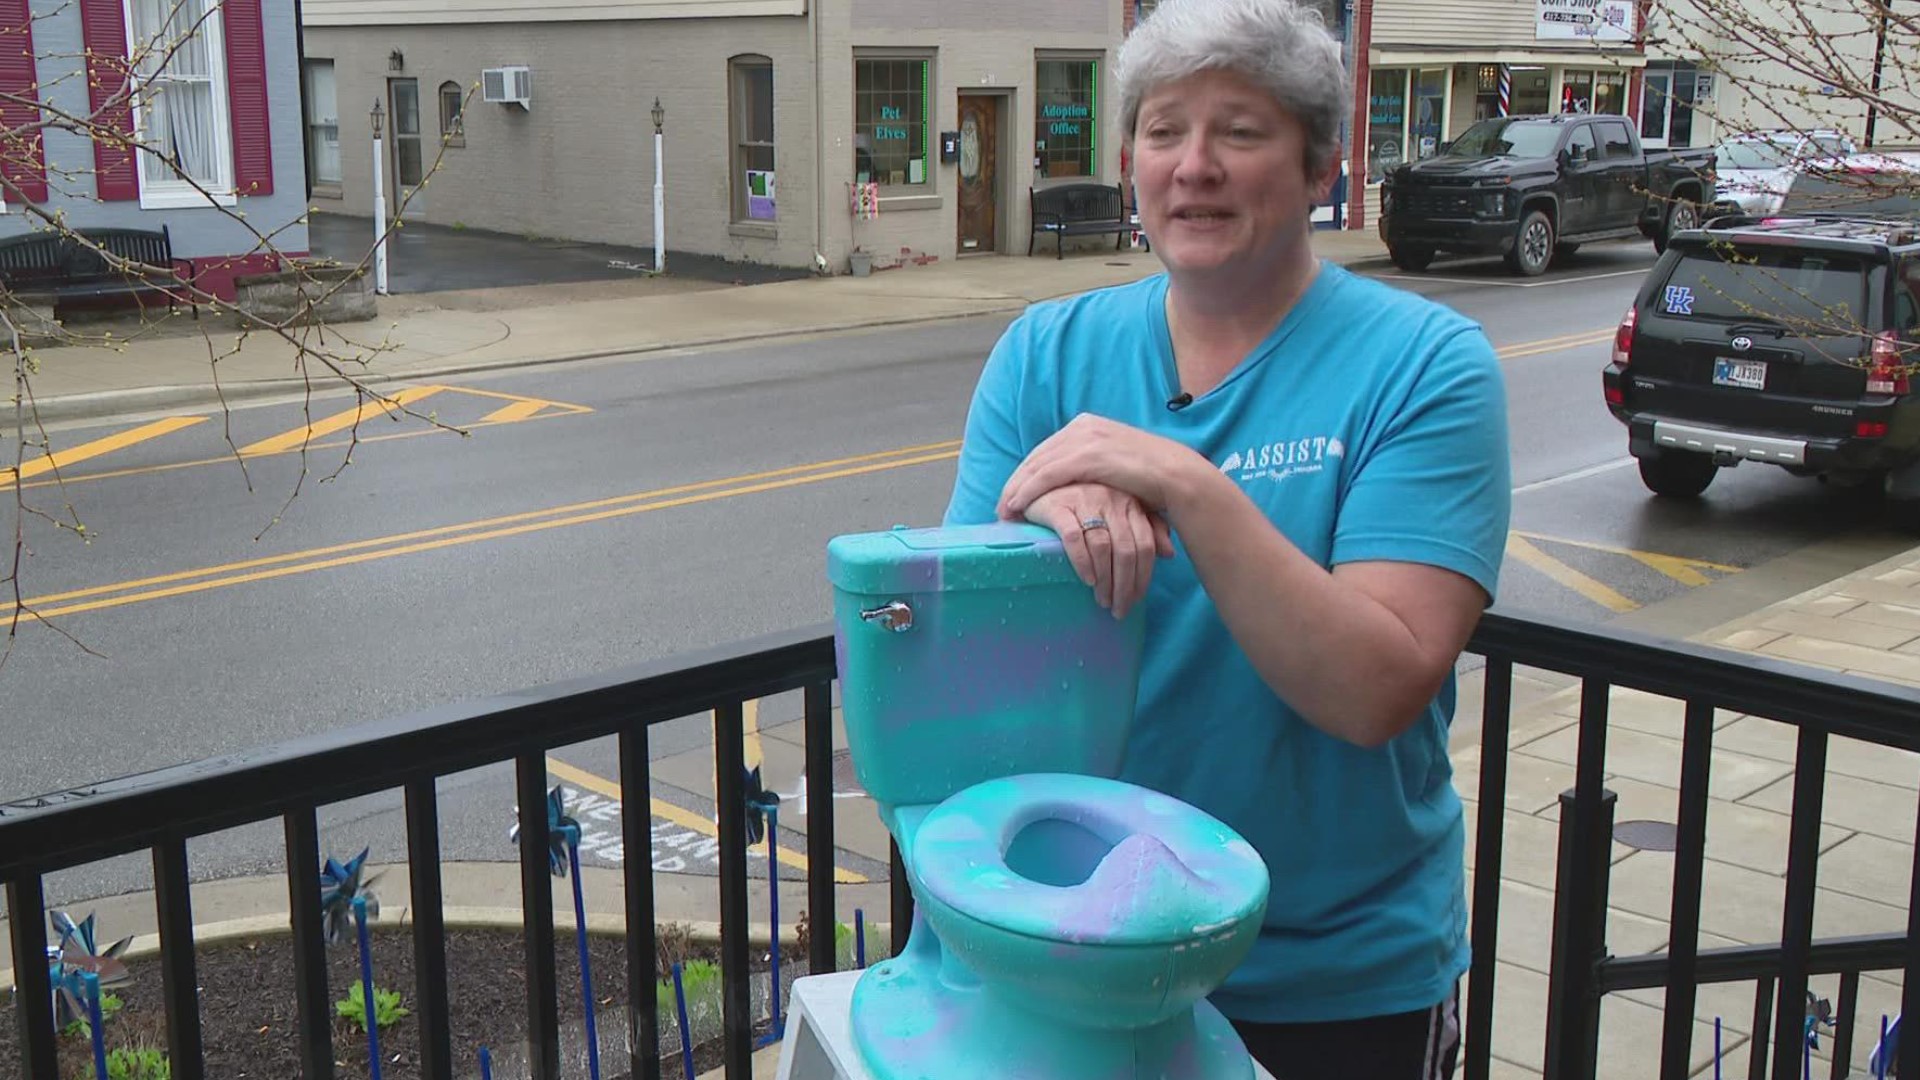 ASSIST Indiana is using a unique mascot in their fundraising efforts to "flush out the violence."